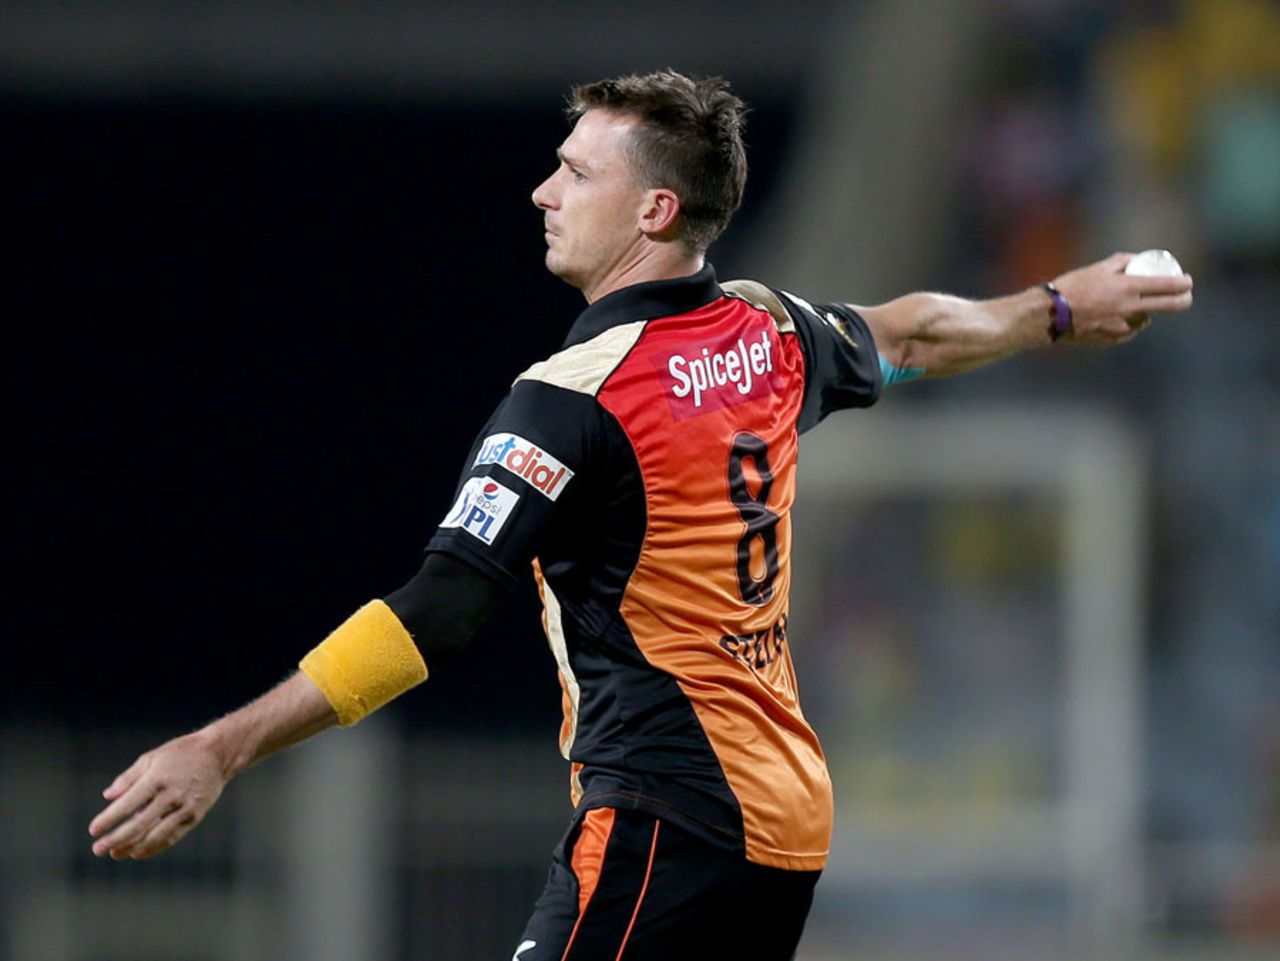 Dale Steyn leaked 24 runs in the final over, Chennai Super Kings v Sunrisers Hyderabad, IPL 2014, Ranchi, May 22, 2014